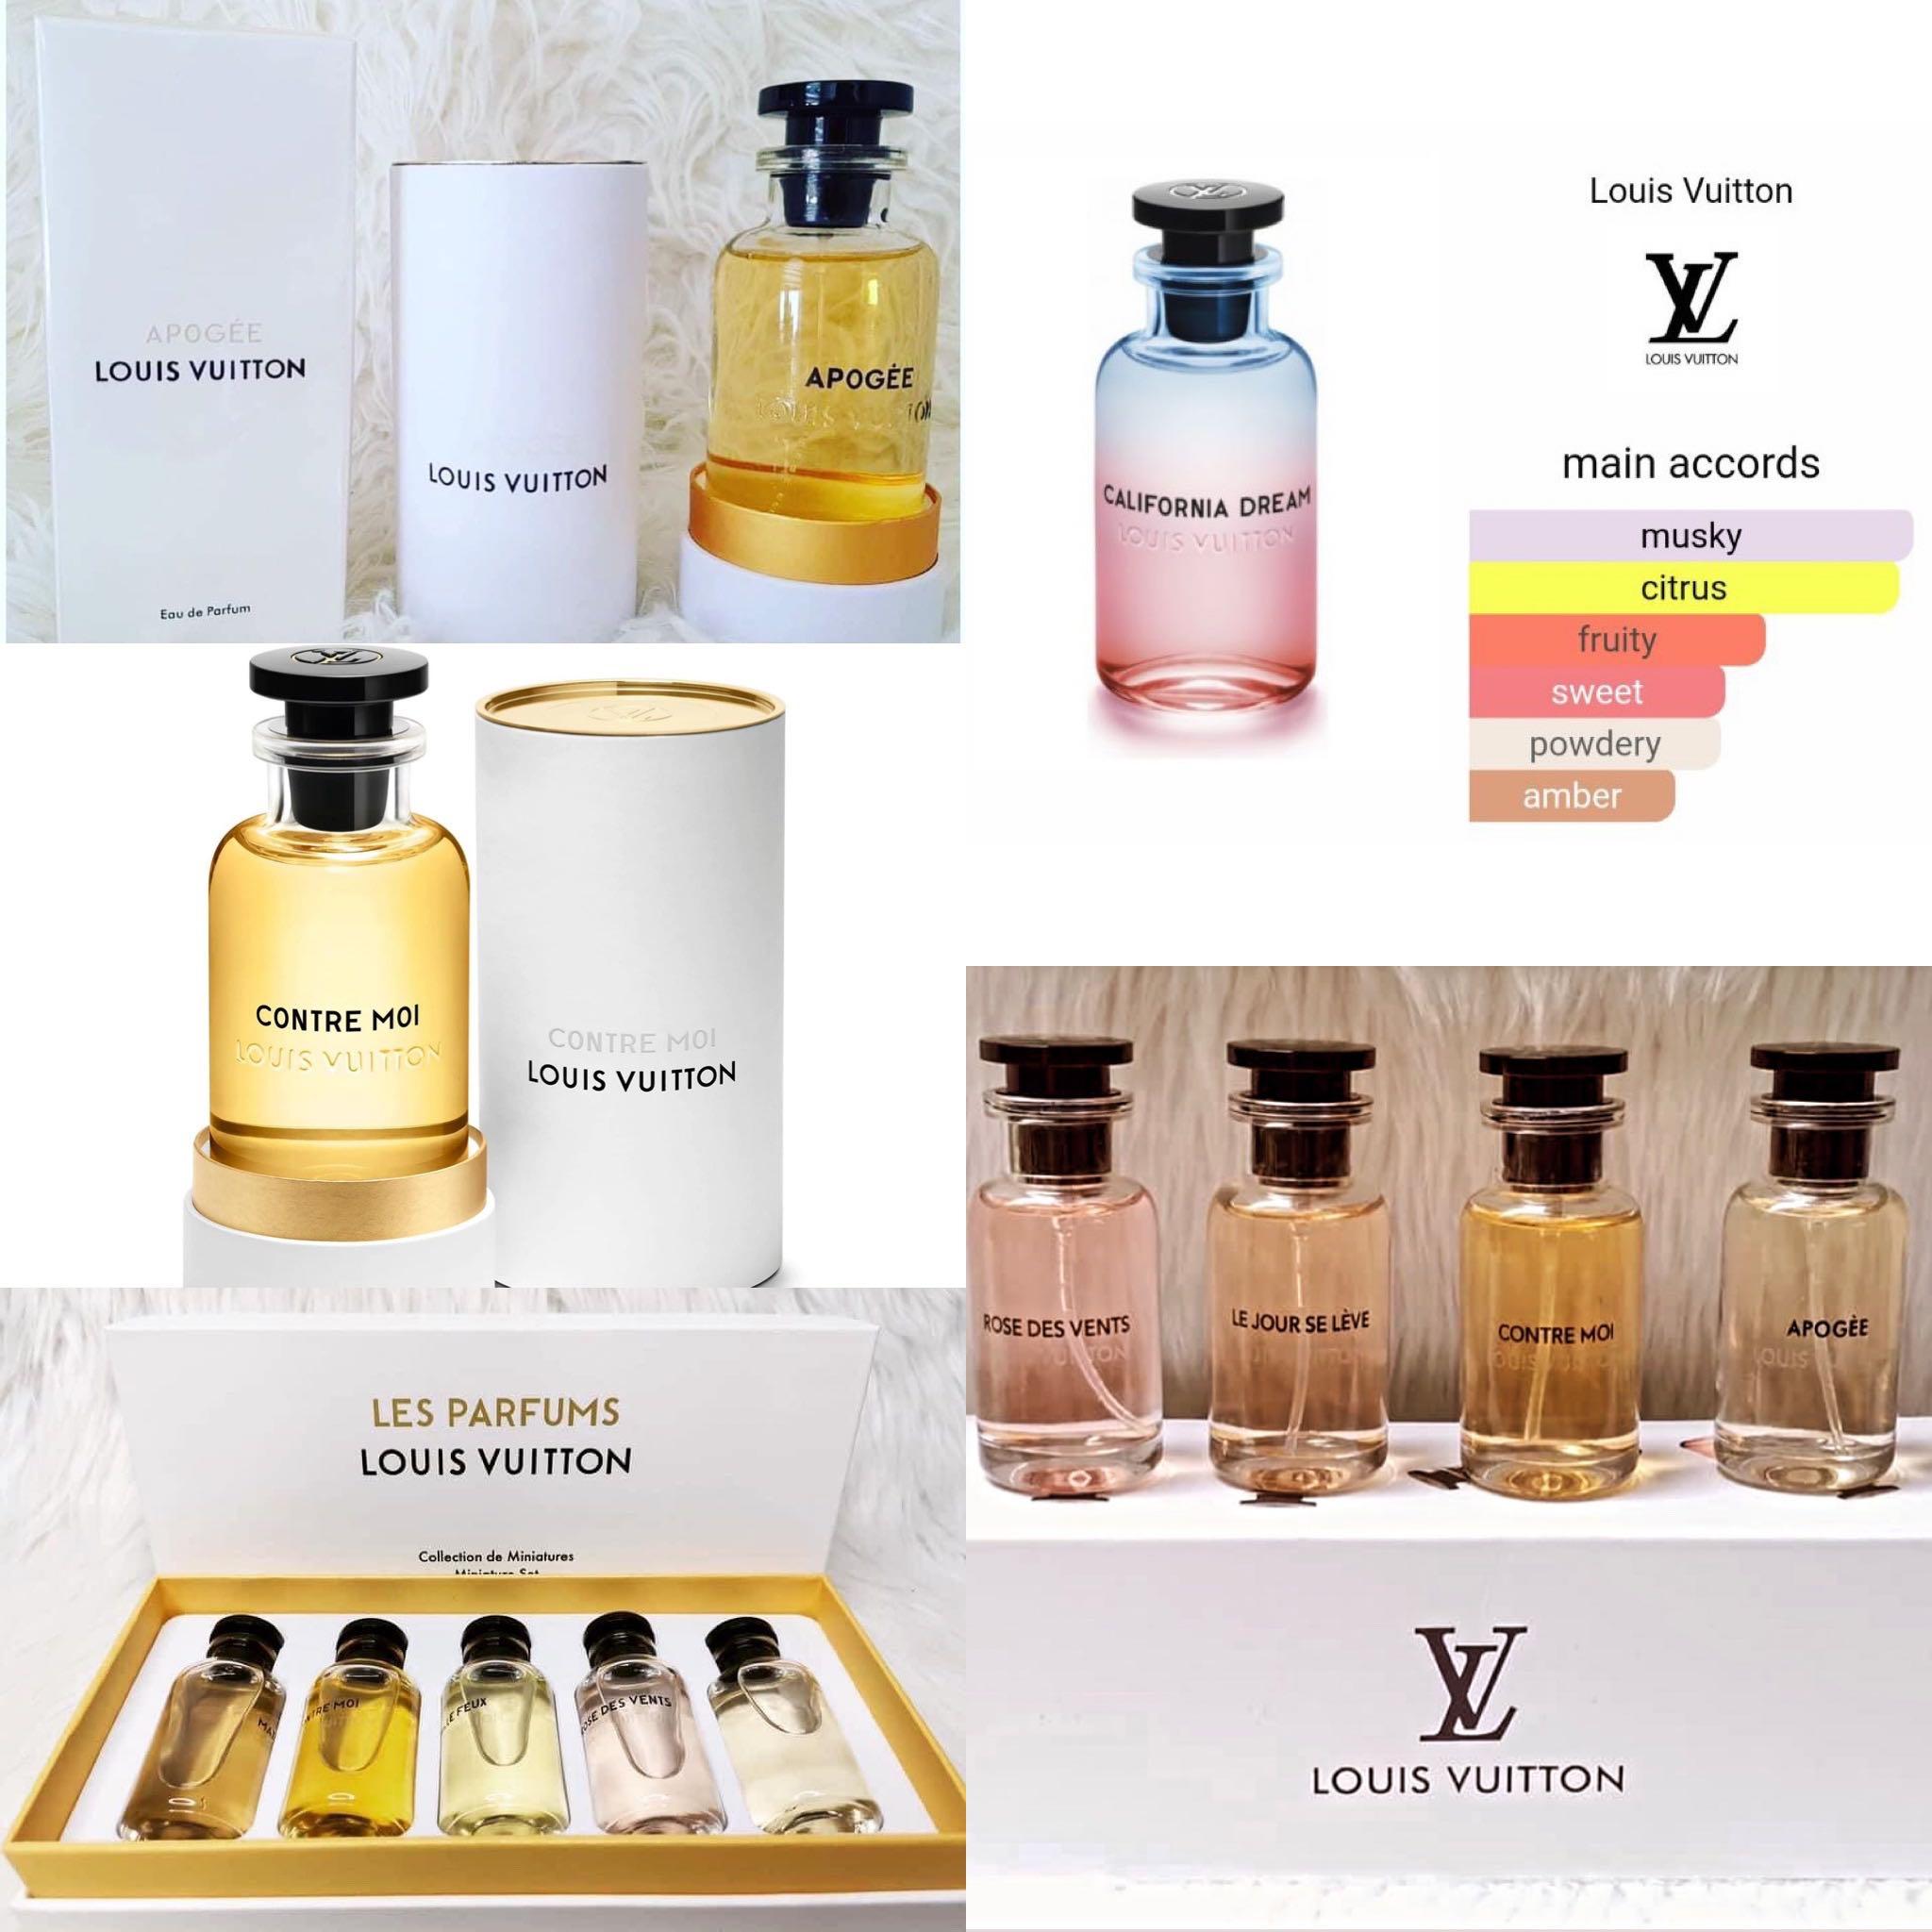 Louis Vuitton Matiere Noire Edp for Women 100ml, Beauty & Personal Care,  Fragrance & Deodorants on Carousell